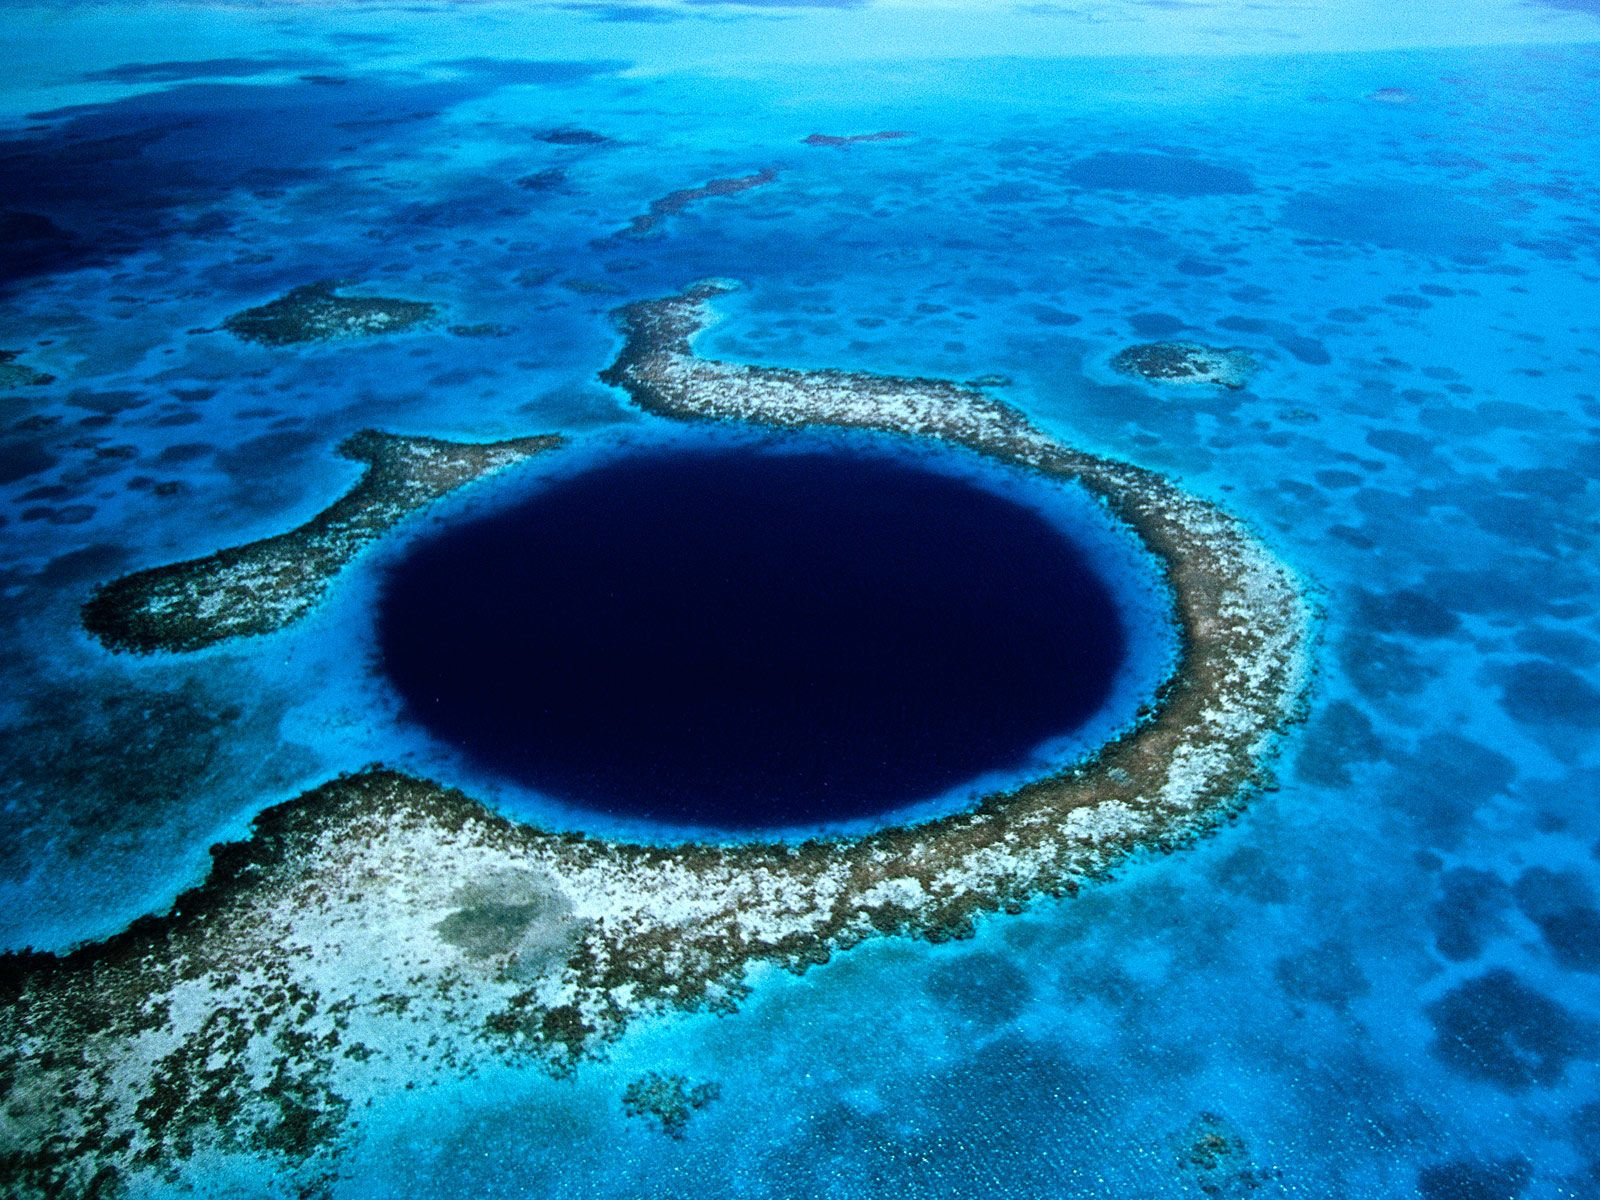 This is the Great Blue Hole—a giant sinkhole located 40 miles off the coast of Belize in the Lighthouse Reef. It formed more than 150,000 years ago and is now a UNESCO World Heritage site. A popular diving destination, the Blue Hole also attracts scientists hoping to find answers buried in its mud. Belize's "blue hole." Photo by Eric Pheterson/flickr/CC BY 2.0